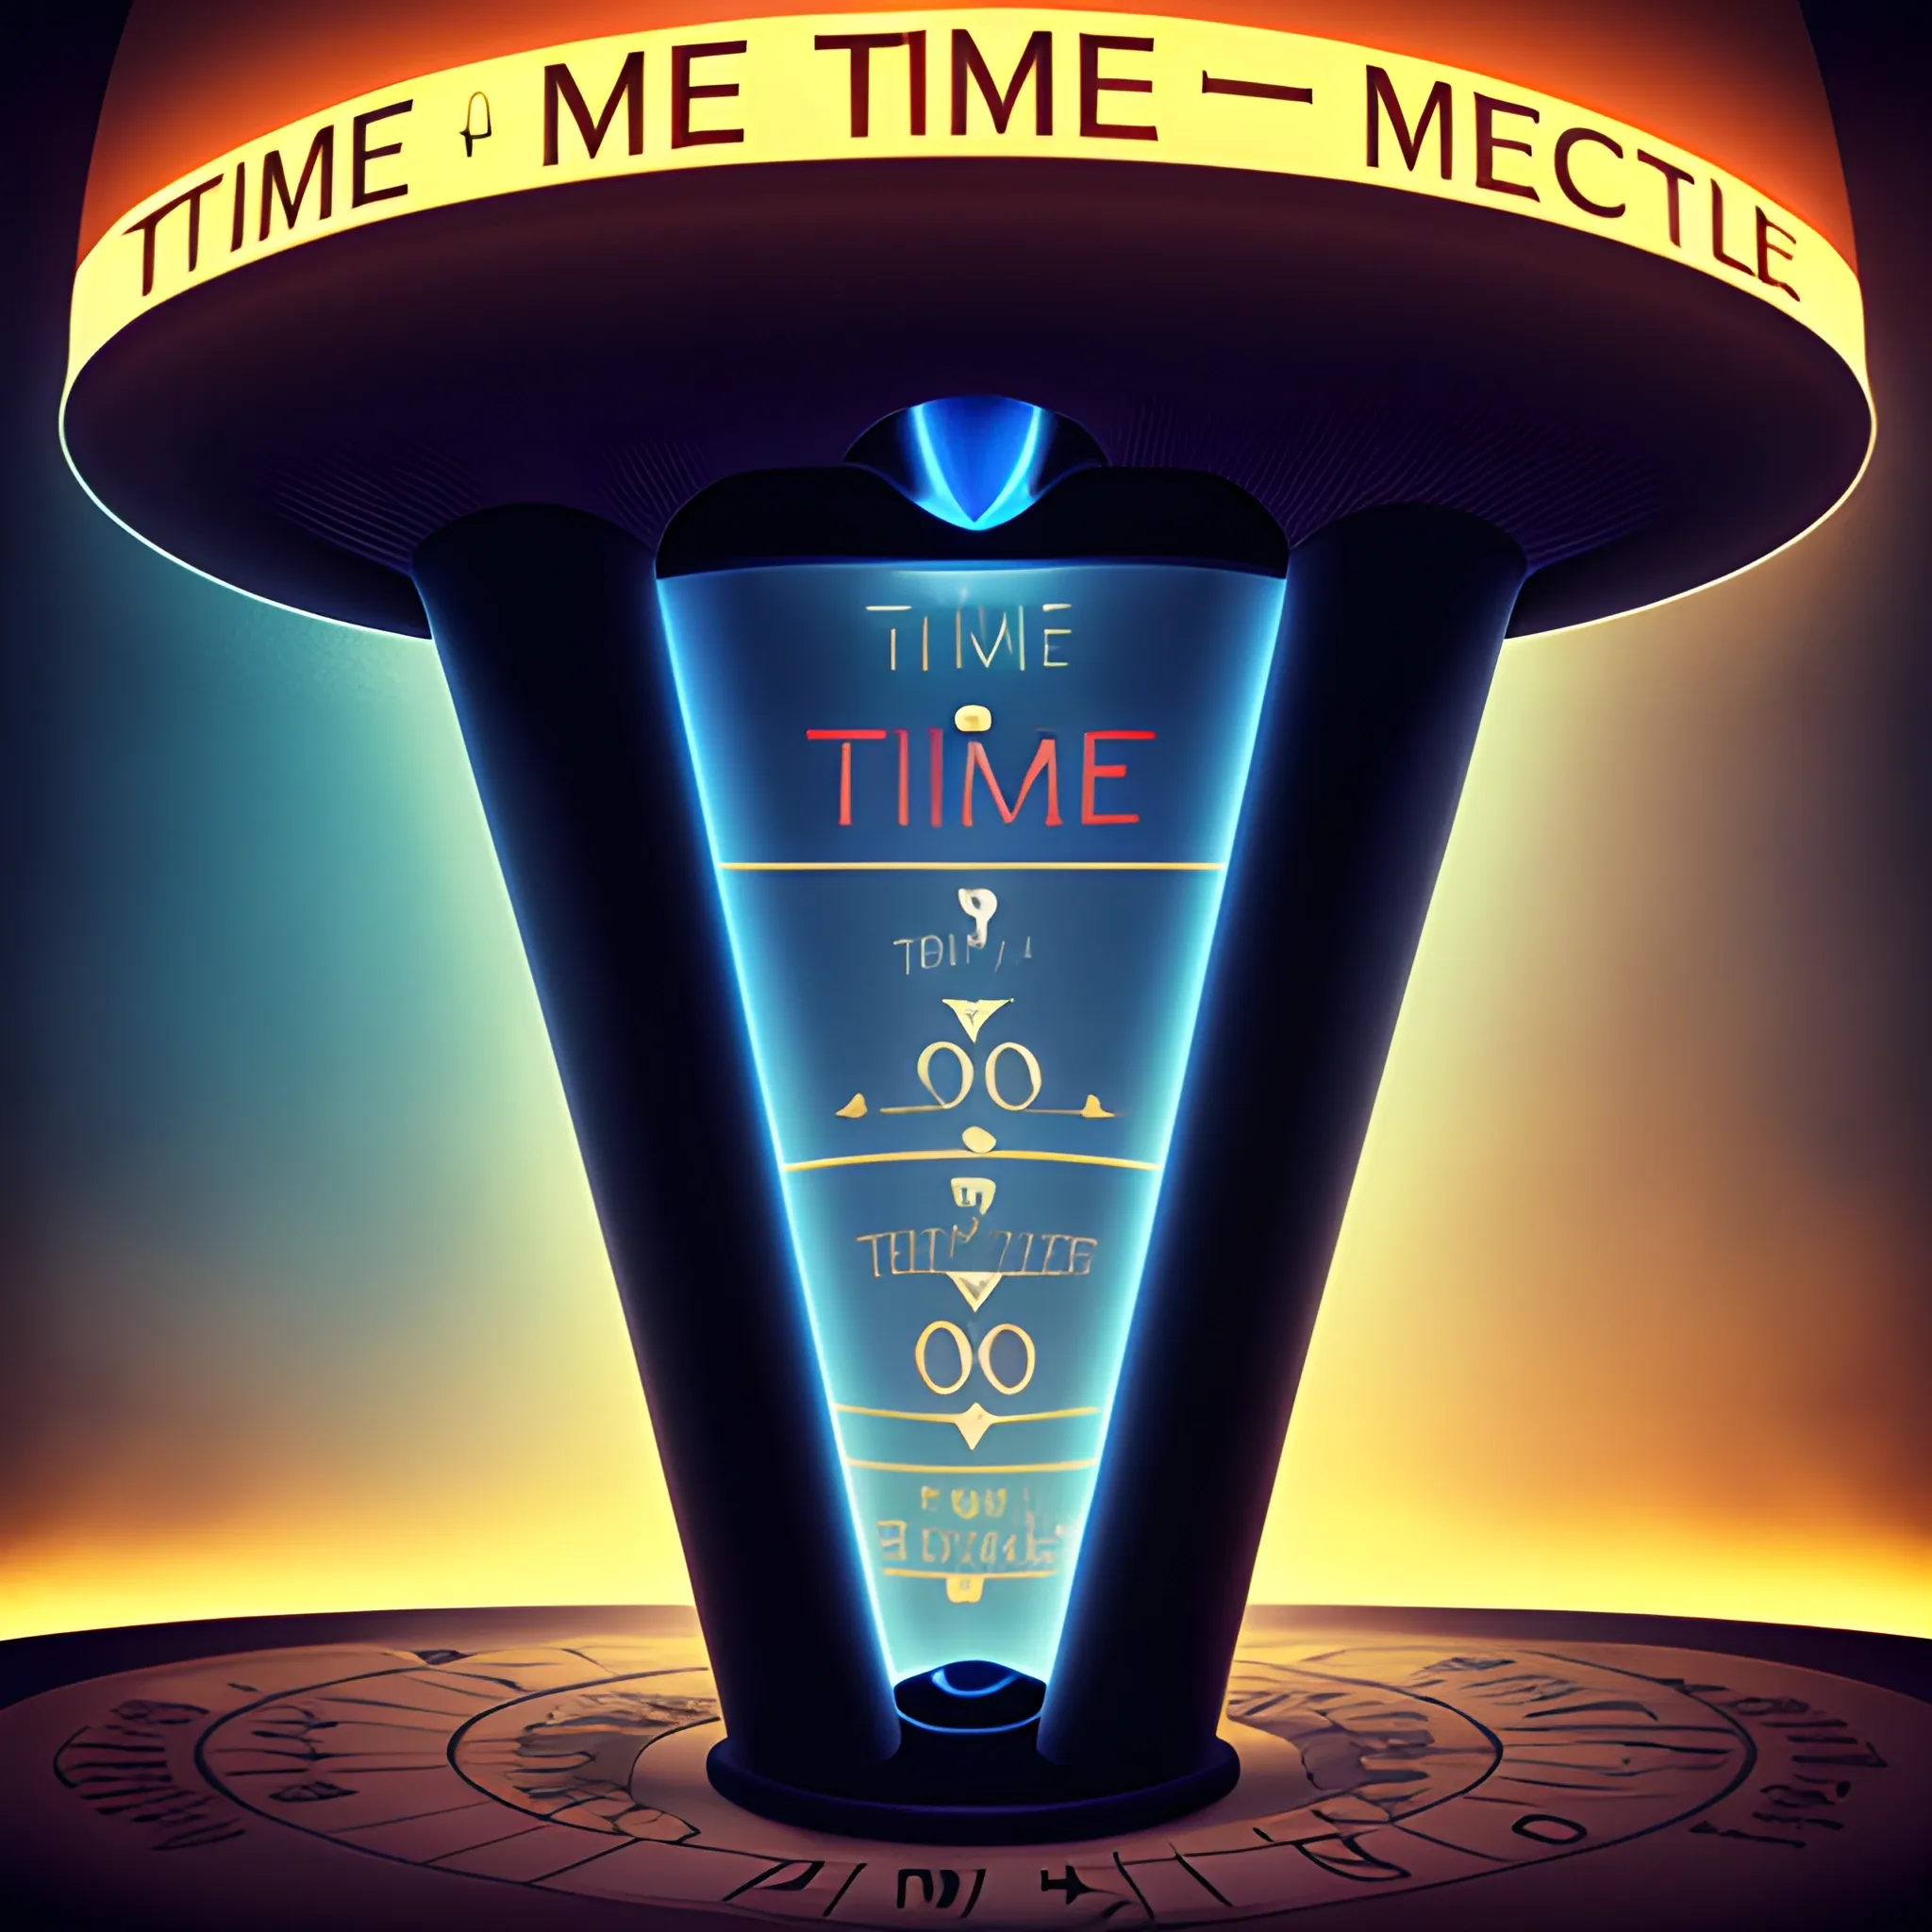 Time machine in operation,Time funnel